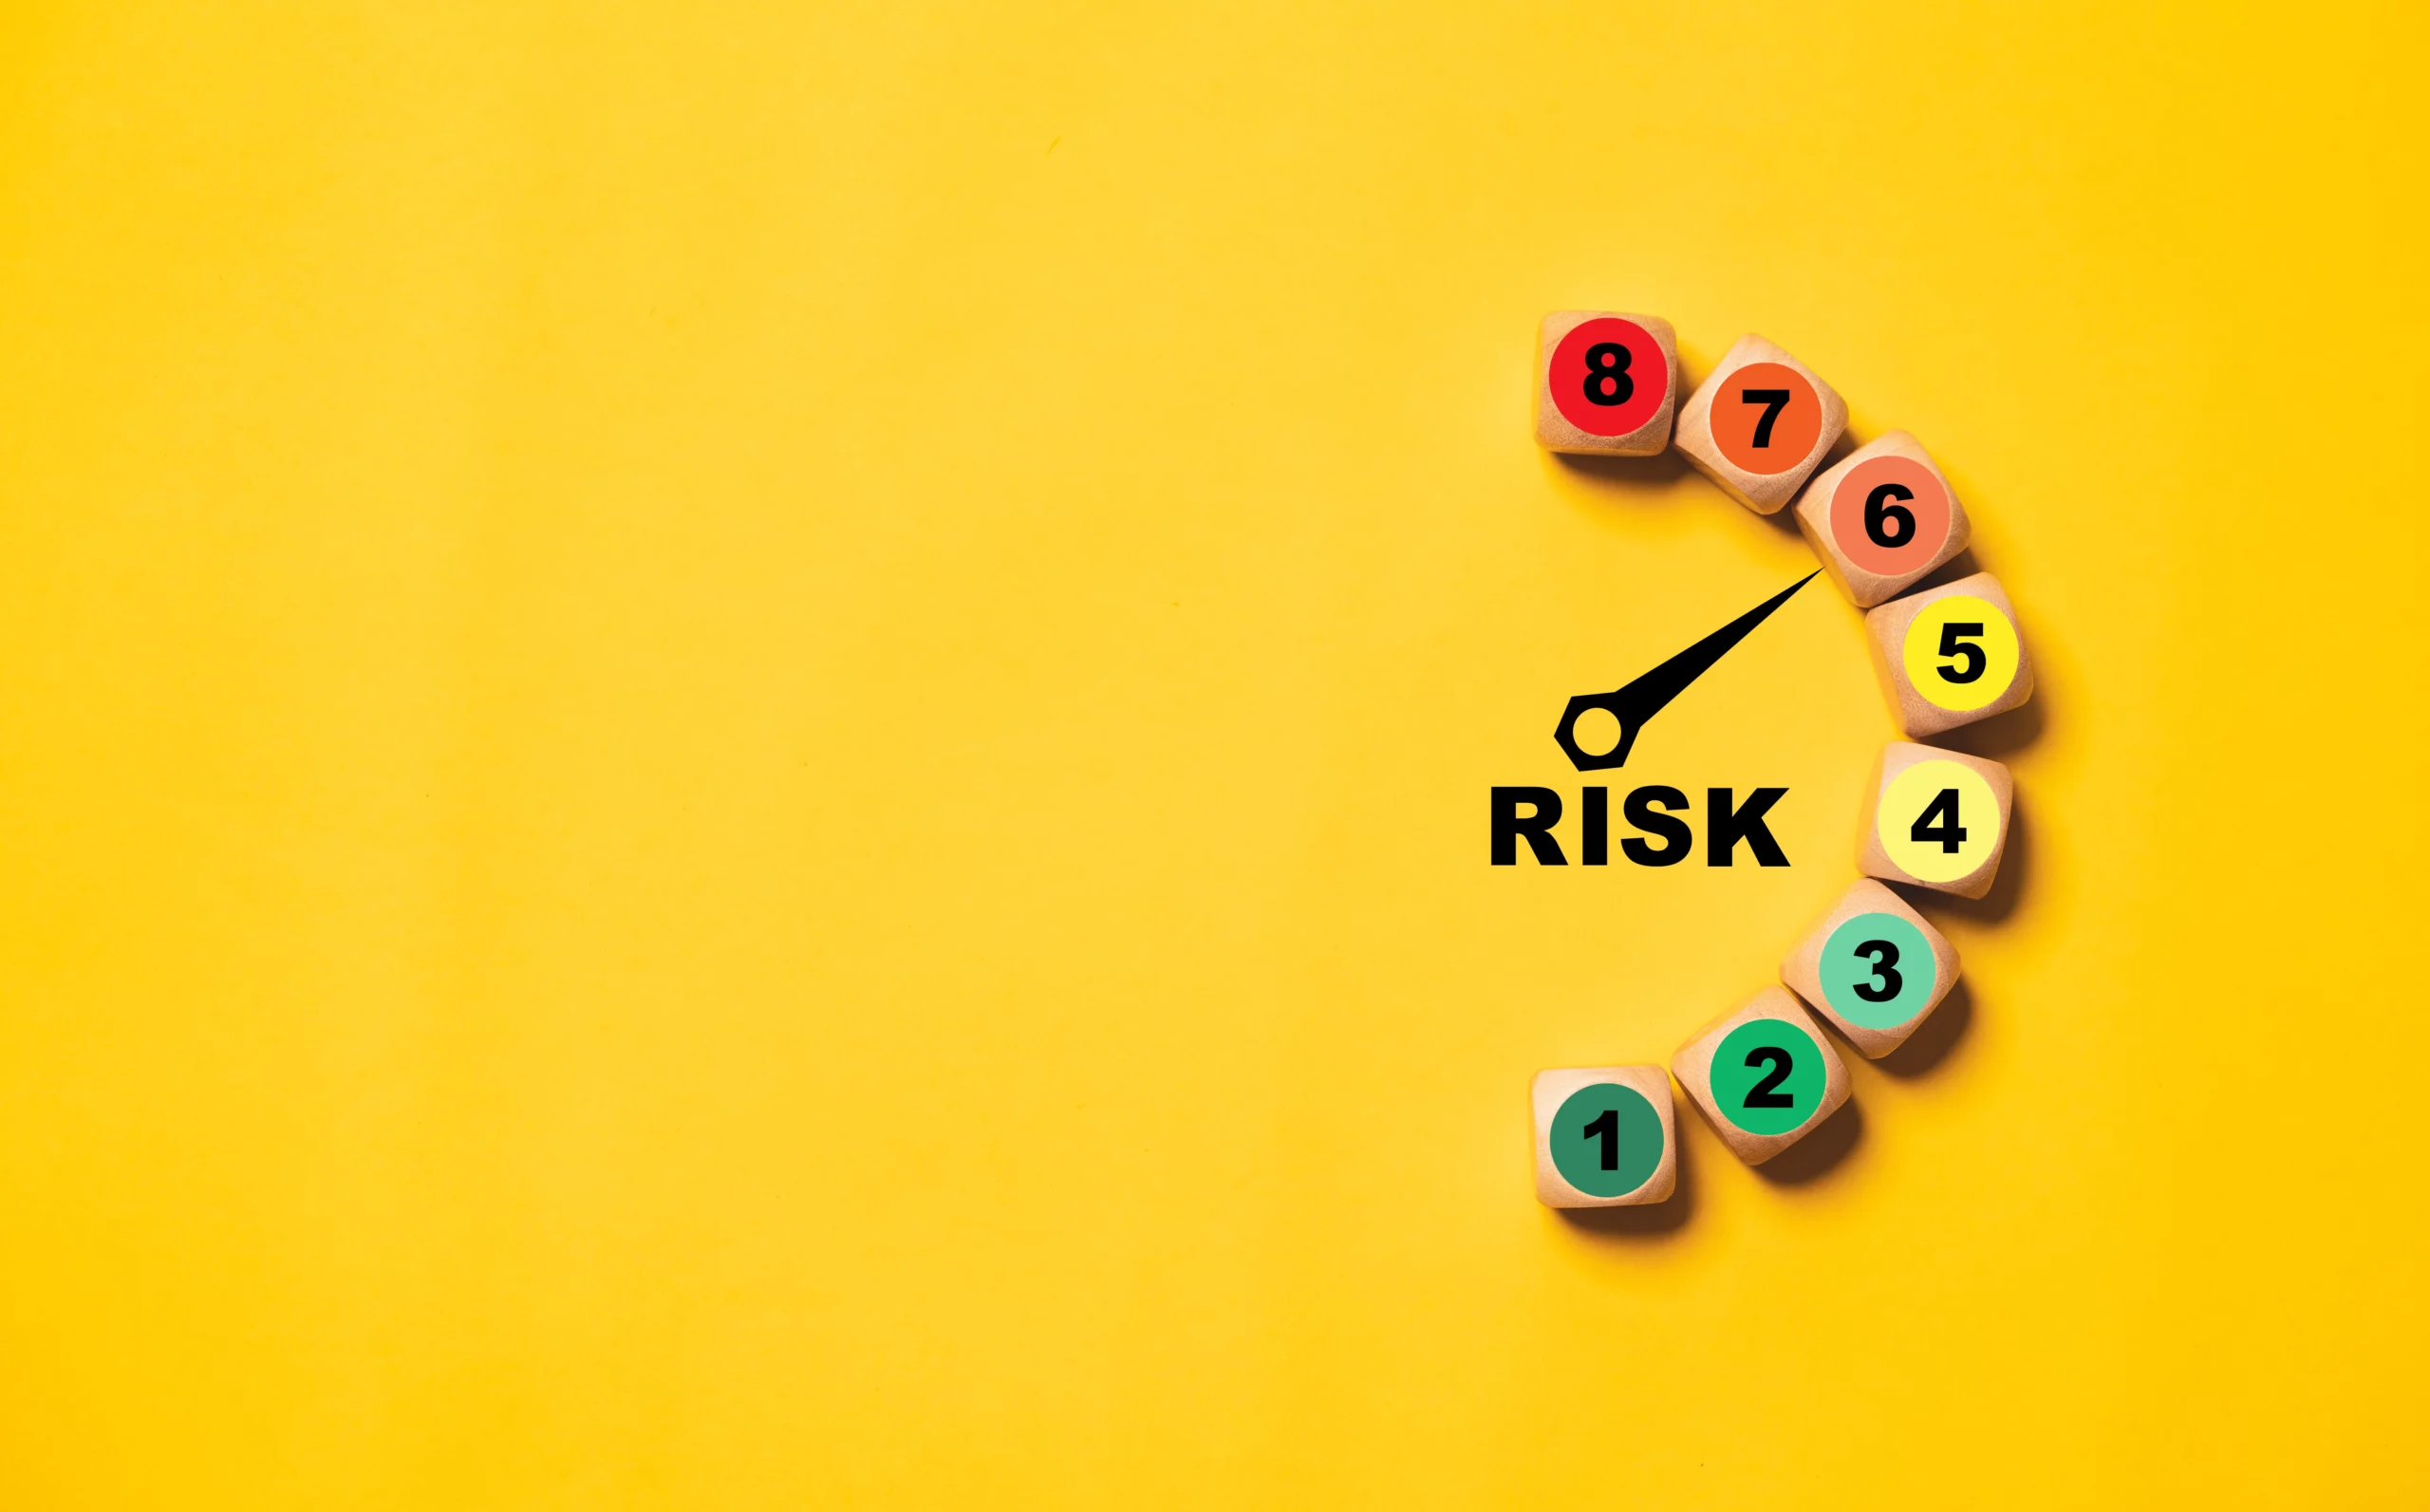 implementing a risk management system and risk assessment tools will help to control hazards and risks within the workplace. 